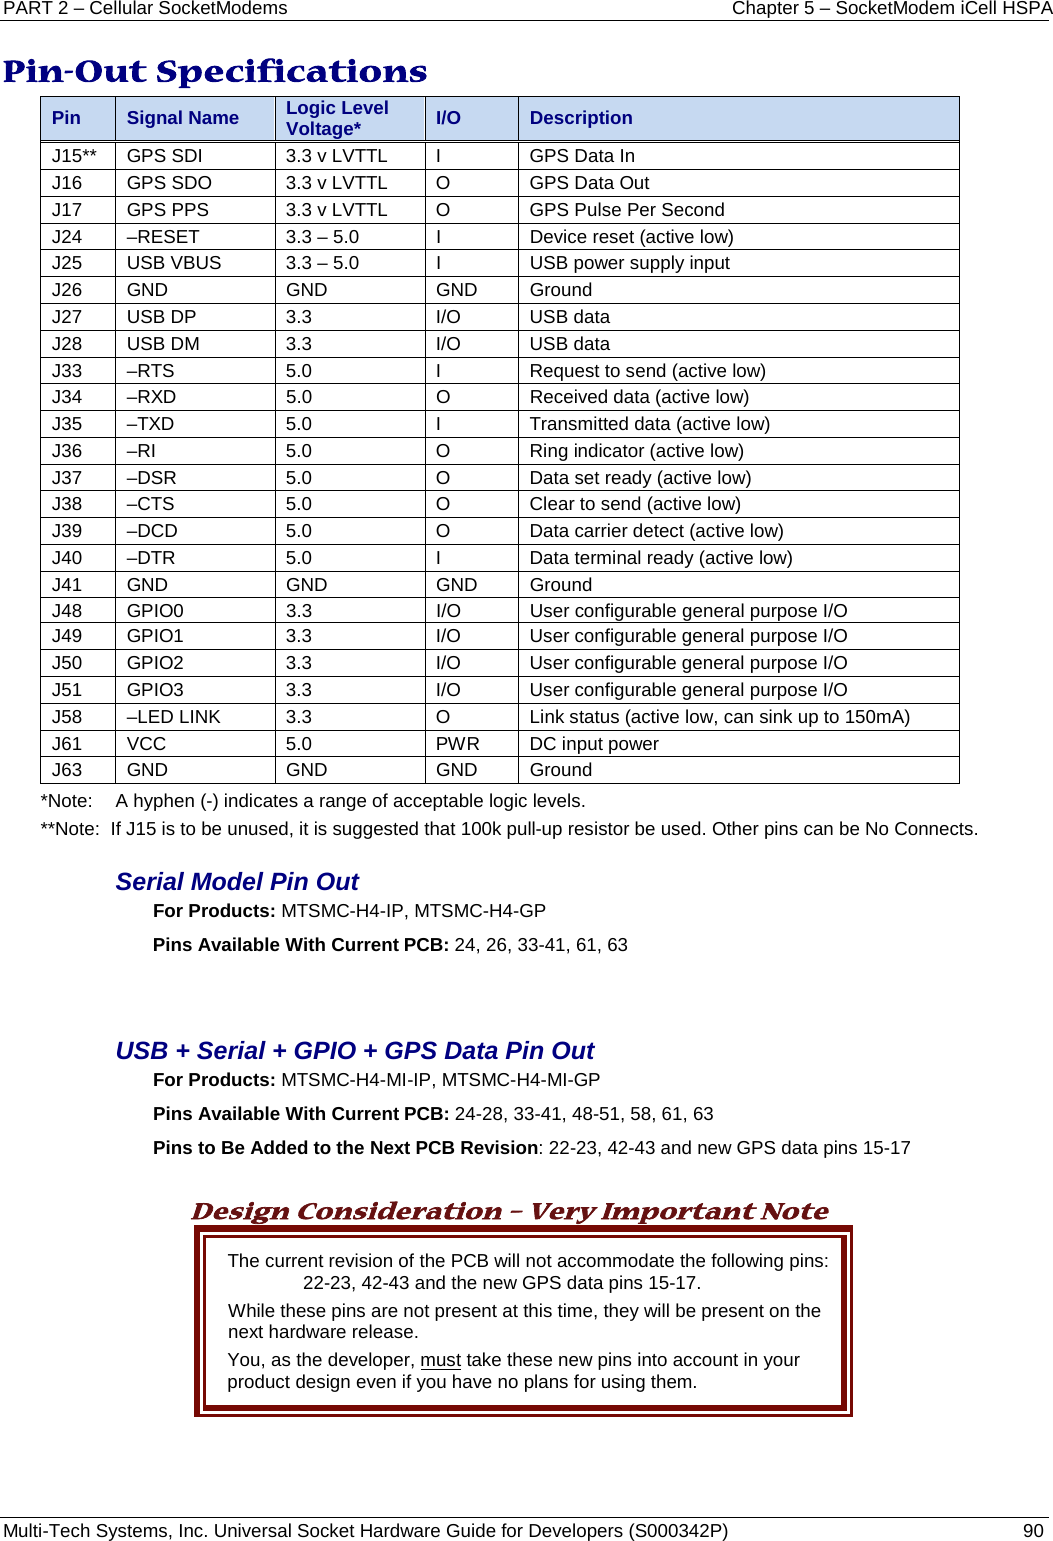 PART 2 – Cellular SocketModems Chapter 5 – SocketModem iCell HSPA Multi-Tech Systems, Inc. Universal Socket Hardware Guide for Developers (S000342P)  90  Pin-Out Specifications  Pin  Signal Name Logic Level Voltage* I/O Description J15** GPS SDI 3.3 v LVTTL  I  GPS Data In J16 GPS SDO 3.3 v LVTTL  O  GPS Data Out J17 GPS PPS 3.3 v LVTTL  O  GPS Pulse Per Second J24  –RESET  3.3 – 5.0  I  Device reset (active low) J25 USB VBUS 3.3 – 5.0  I  USB power supply input J26 GND GND GND Ground J27 USB DP 3.3 I/O USB data J28 USB DM 3.3 I/O USB data J33  –RTS 5.0  I  Request to send (active low) J34  –RXD 5.0  O  Received data (active low) J35  –TXD 5.0  I  Transmitted data (active low) J36  –RI 5.0  O  Ring indicator (active low) J37  –DSR 5.0  O  Data set ready (active low) J38  –CTS 5.0  O  Clear to send (active low) J39  –DCD 5.0  O  Data carrier detect (active low) J40  –DTR 5.0  I  Data terminal ready (active low) J41 GND GND GND Ground J48 GPIO0 3.3 I/O User configurable general purpose I/O J49 GPIO1 3.3 I/O User configurable general purpose I/O J50 GPIO2 3.3 I/O User configurable general purpose I/O J51 GPIO3 3.3 I/O User configurable general purpose I/O J58  –LED LINK 3.3  O  Link status (active low, can sink up to 150mA) J61 VCC 5.0 PWR DC input power J63 GND GND GND Ground *Note: A hyphen (-) indicates a range of acceptable logic levels. **Note:  If J15 is to be unused, it is suggested that 100k pull-up resistor be used. Other pins can be No Connects.  Serial Model Pin Out For Products: MTSMC-H4-IP, MTSMC-H4-GP Pins Available With Current PCB: 24, 26, 33-41, 61, 63   USB + Serial + GPIO + GPS Data Pin Out For Products: MTSMC-H4-MI-IP, MTSMC-H4-MI-GP Pins Available With Current PCB: 24-28, 33-41, 48-51, 58, 61, 63 Pins to Be Added to the Next PCB Revision: 22-23, 42-43 and new GPS data pins 15-17  Design Consideration – Very Important Note The current revision of the PCB will not accommodate the following pins:  22-23, 42-43 and the new GPS data pins 15-17.   While these pins are not present at this time, they will be present on the next hardware release.   You, as the developer, must take these new pins into account in your product design even if you have no plans for using them.       